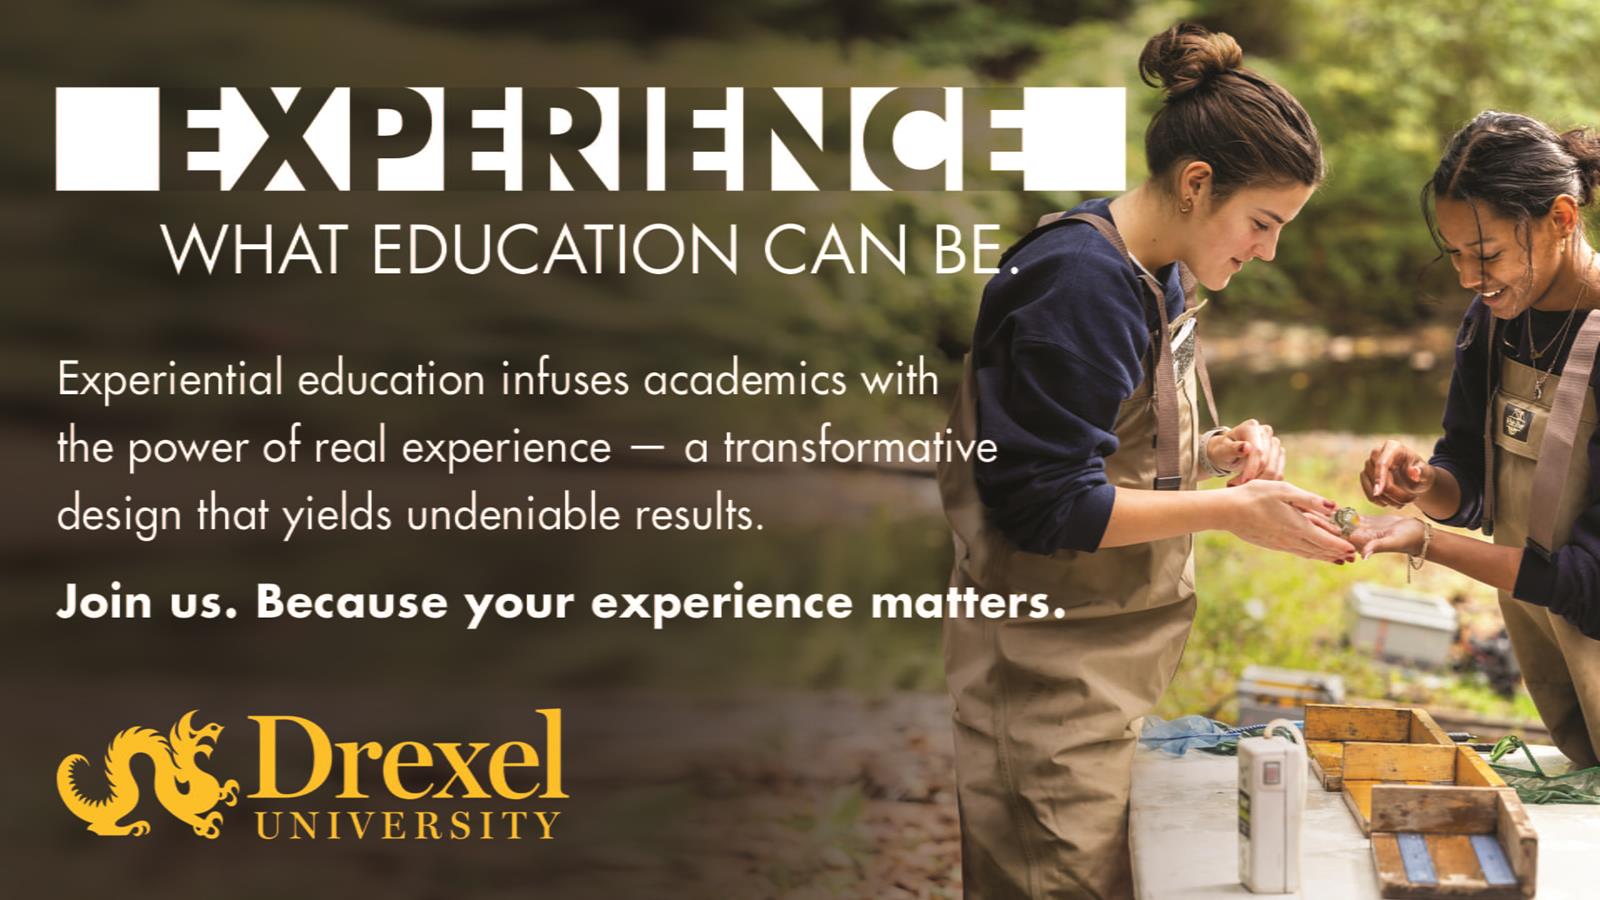 Experiential education infuses academics with the power of real experience - a transformative design that yields undeniable results.